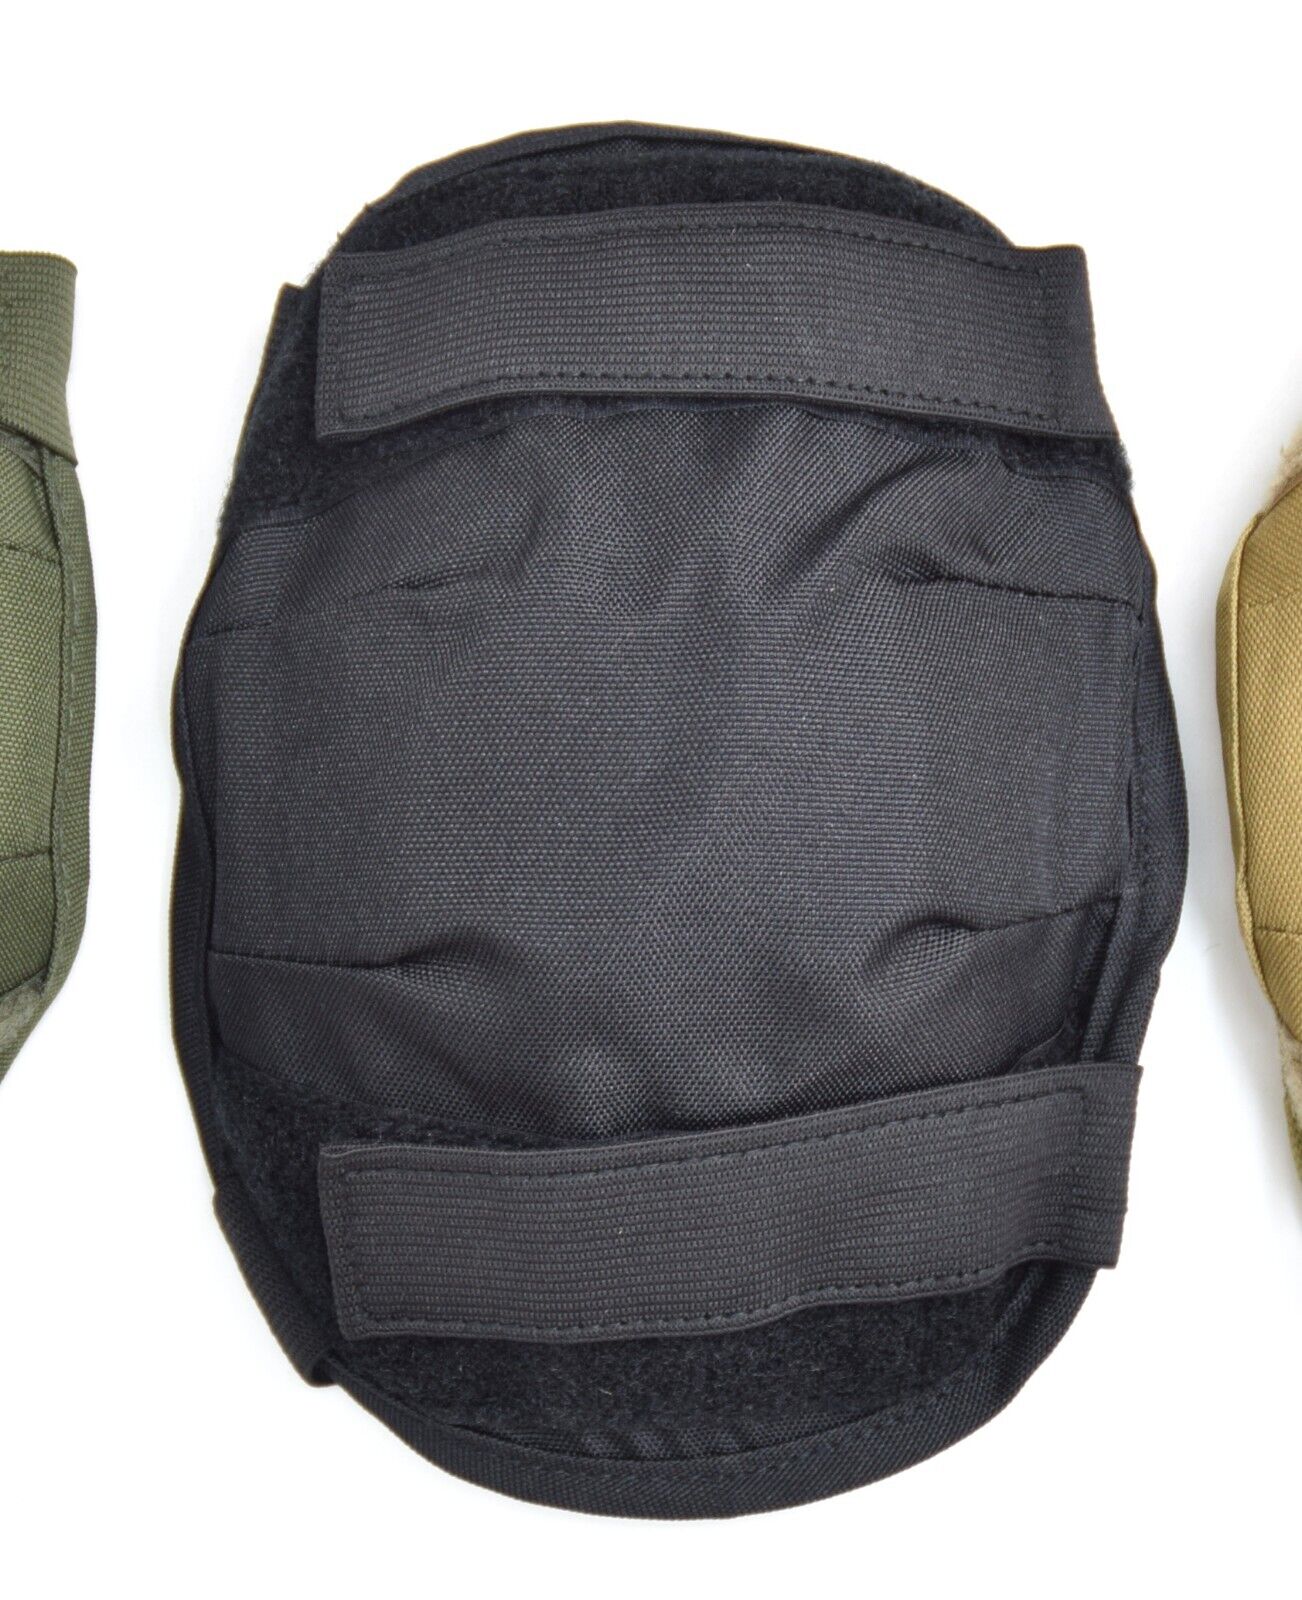 British Army Style Knee Pads Protective Pad Military Cadet Work Outdoor Airsoft 